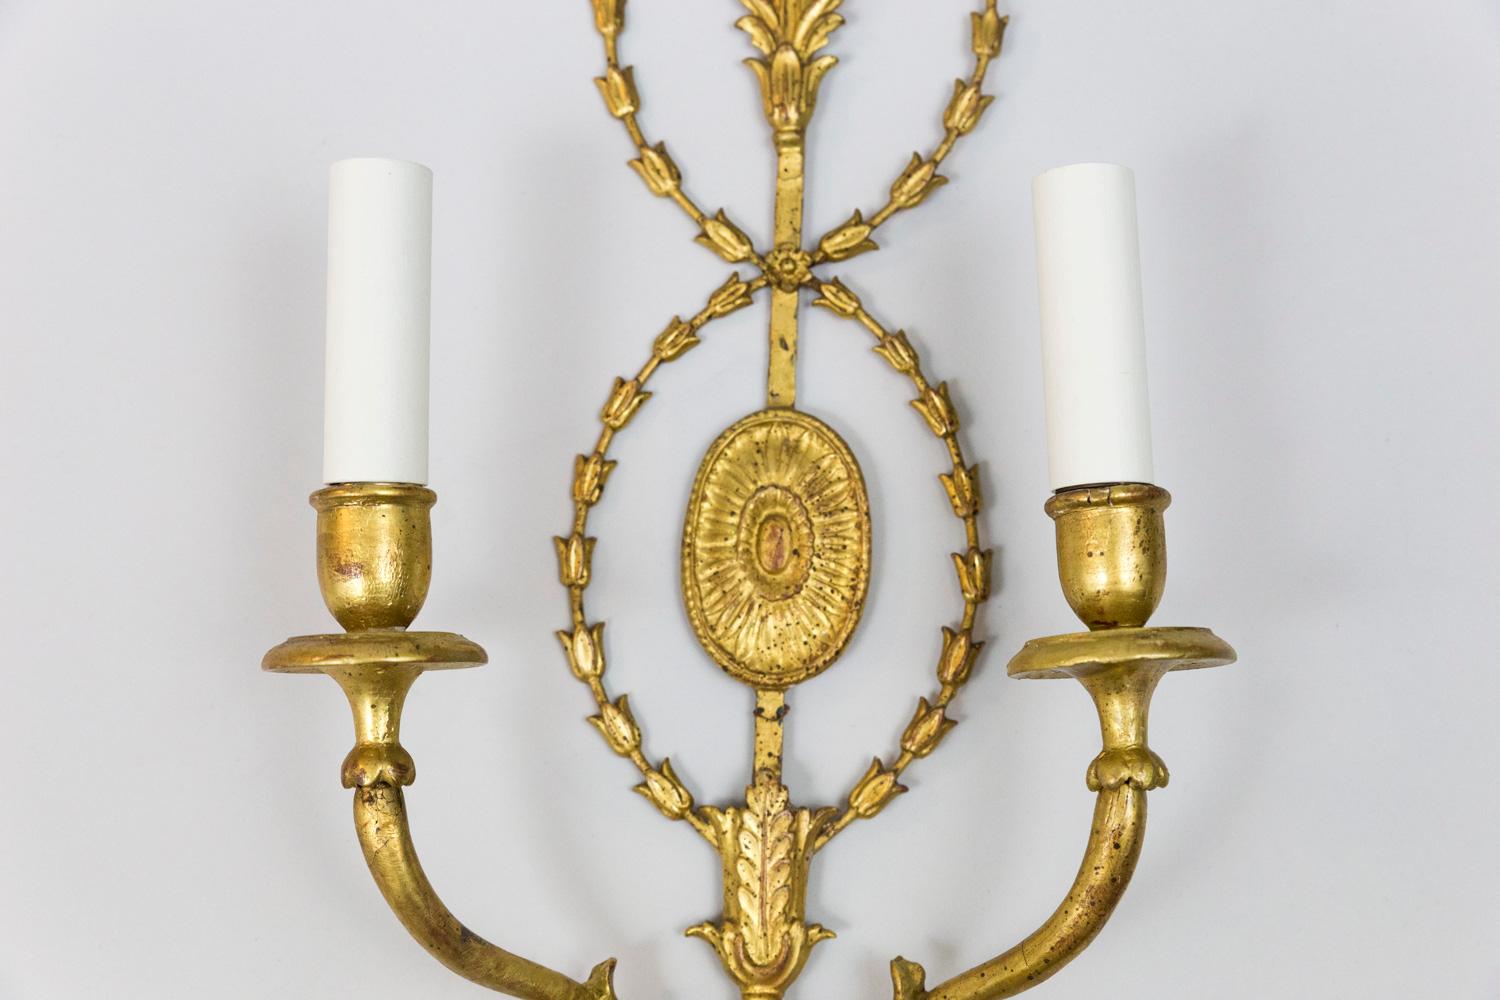 Pair of Adam Style Wall Sconces in Gilt Stucco and Metal, 1950s For Sale 1